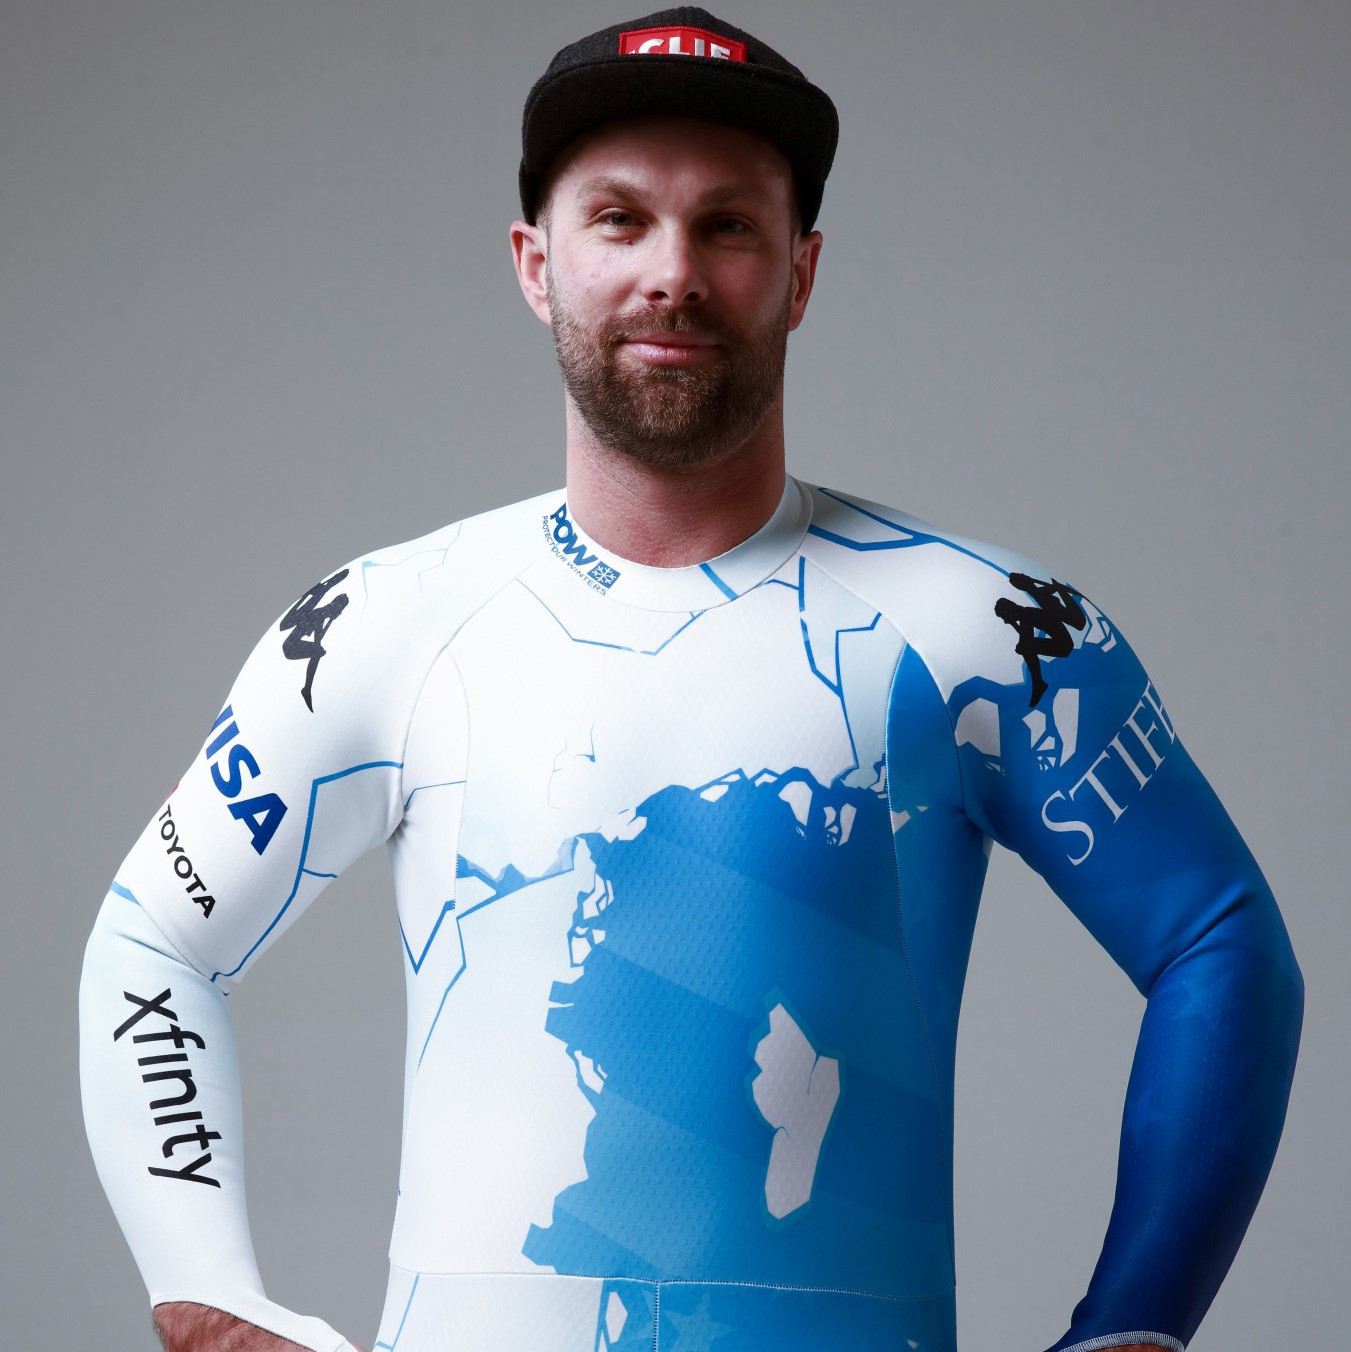 United States Ski and Snowboard partner with Kappa and POW to create climate changing race suit